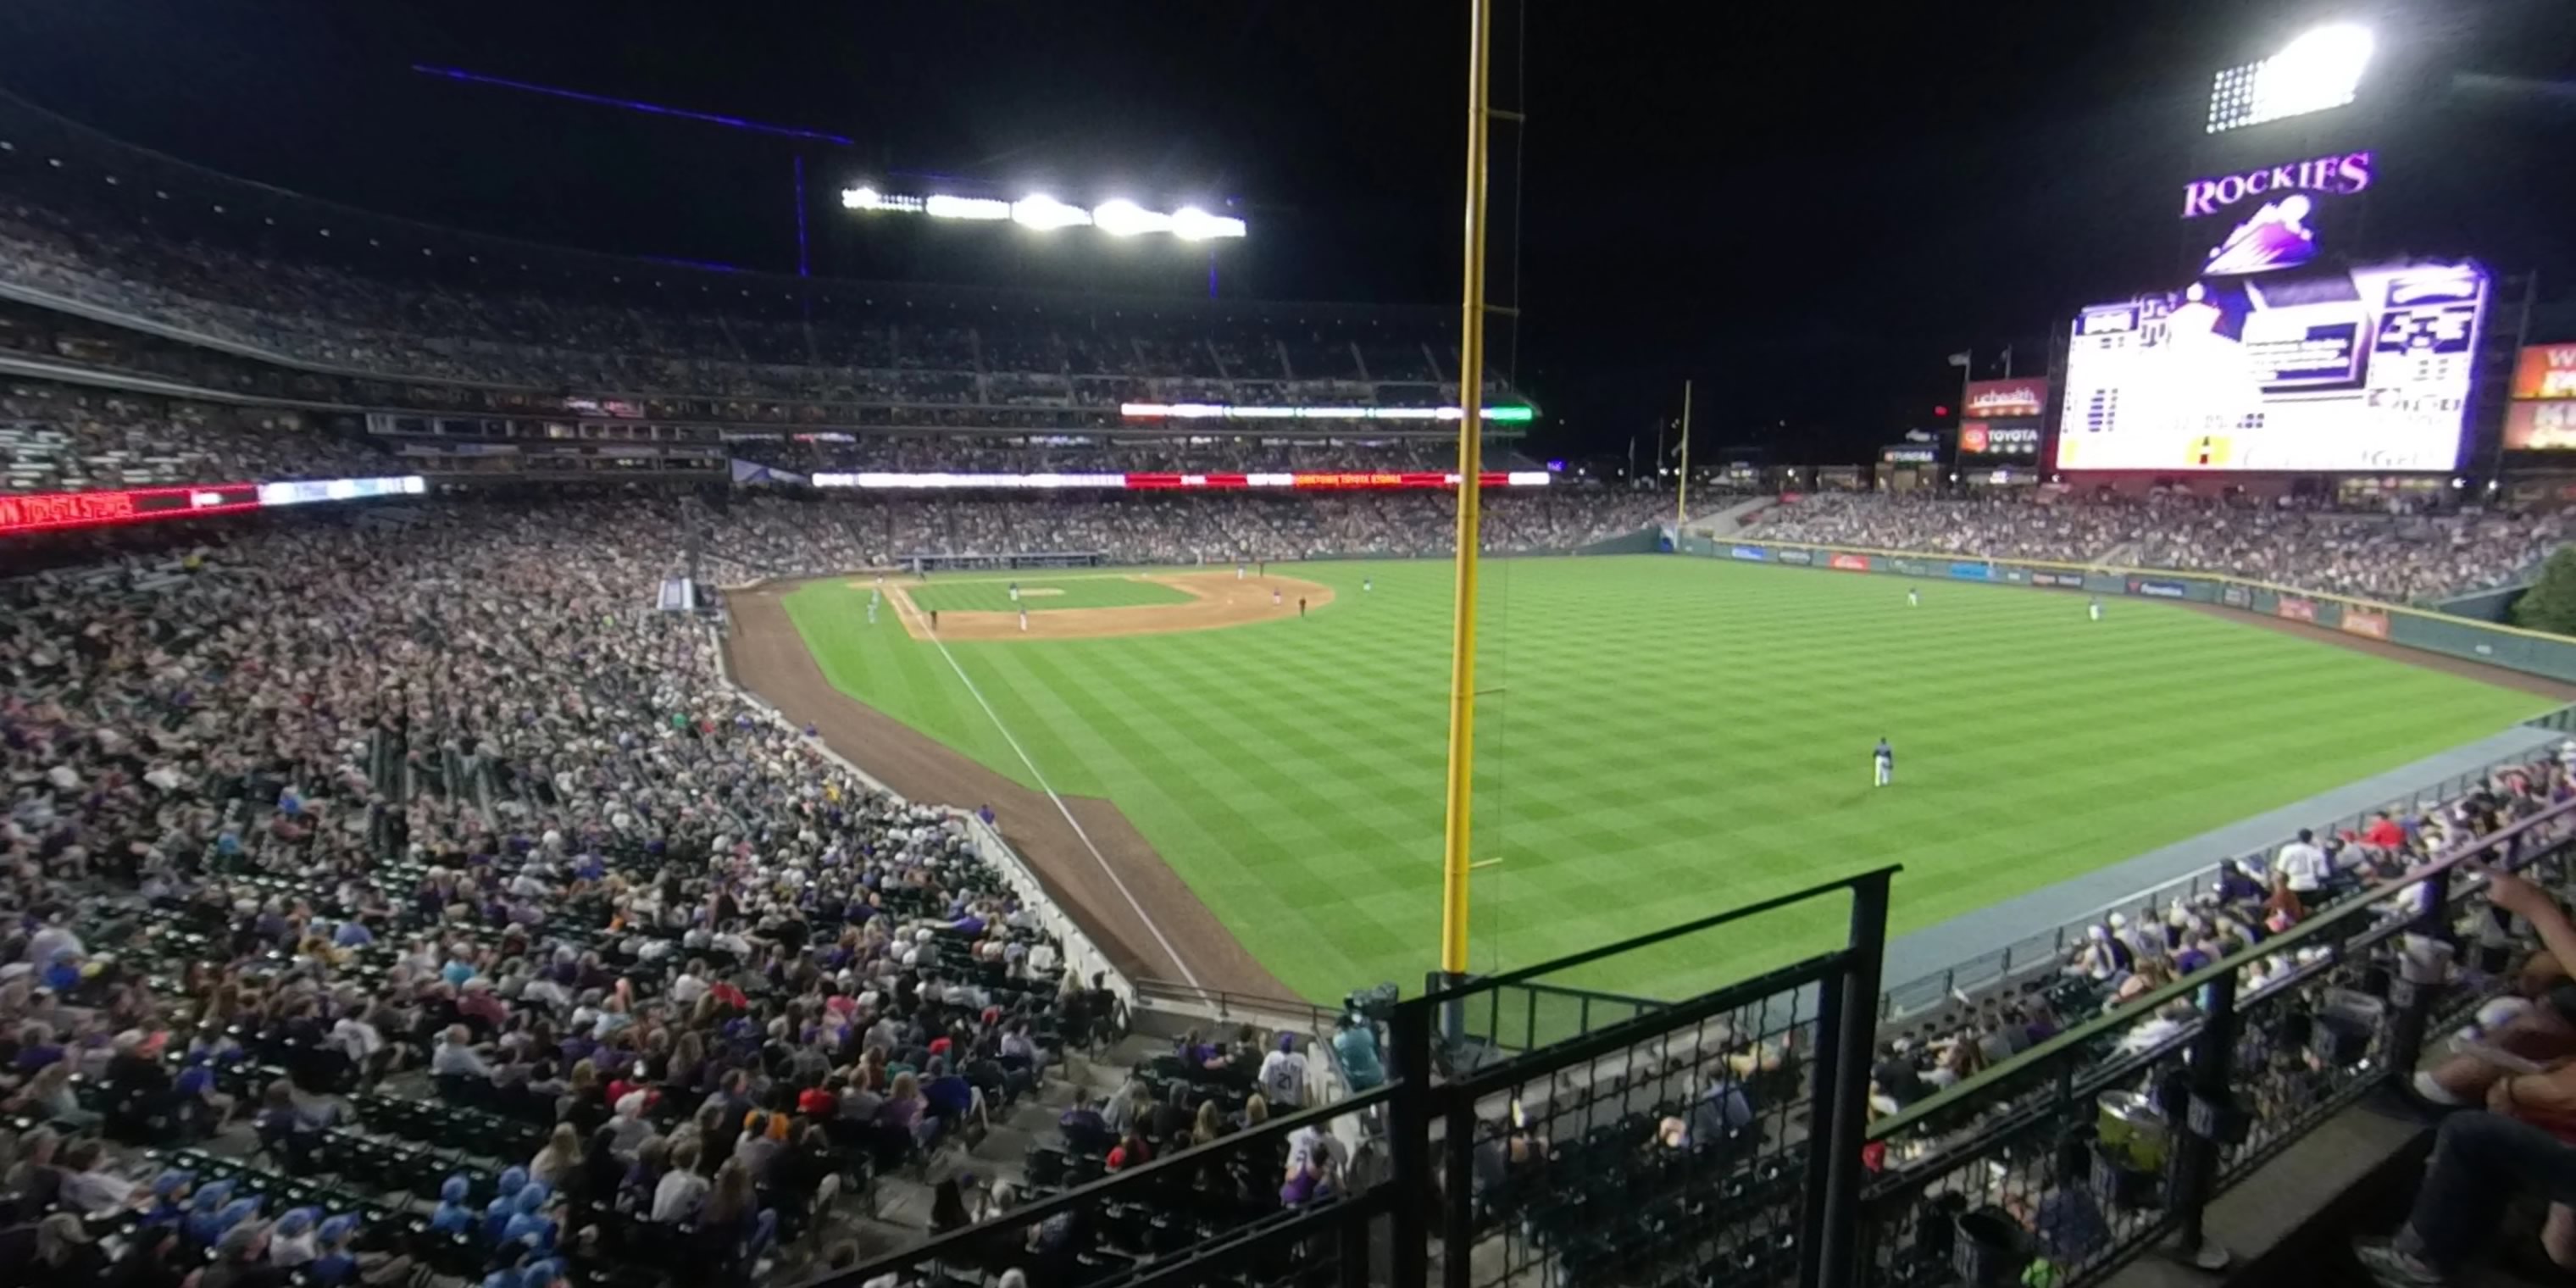 section 208 panoramic seat view  - coors field